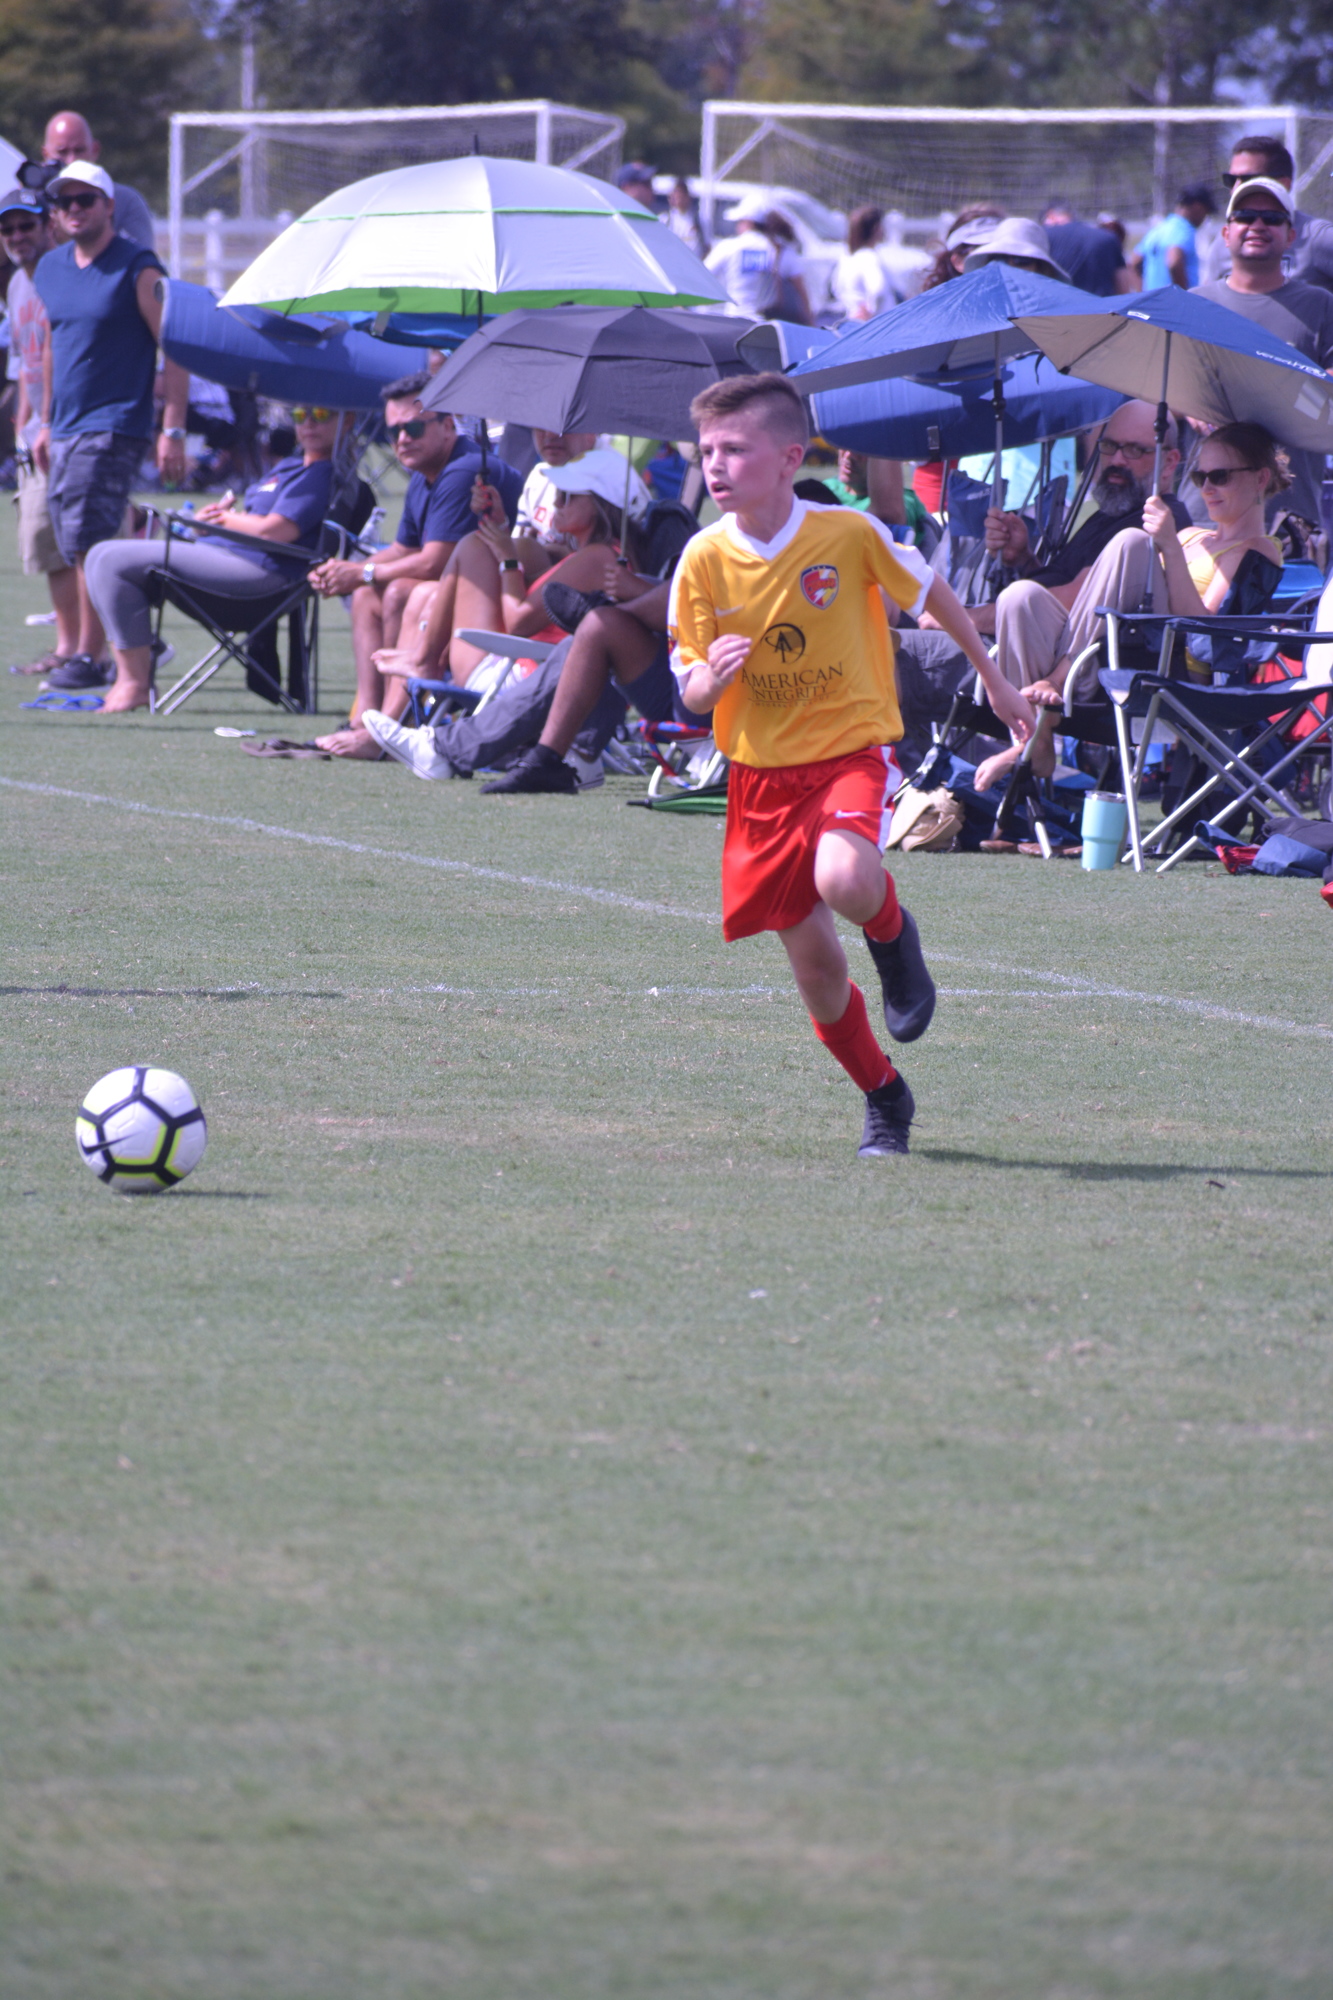 Lakewood Ranch Chargers U12 forward Brayden Muye tracks down a loose ball. The Chargers were one of the teams watched by scouts at the at the IVP by FIGO7 tournament.